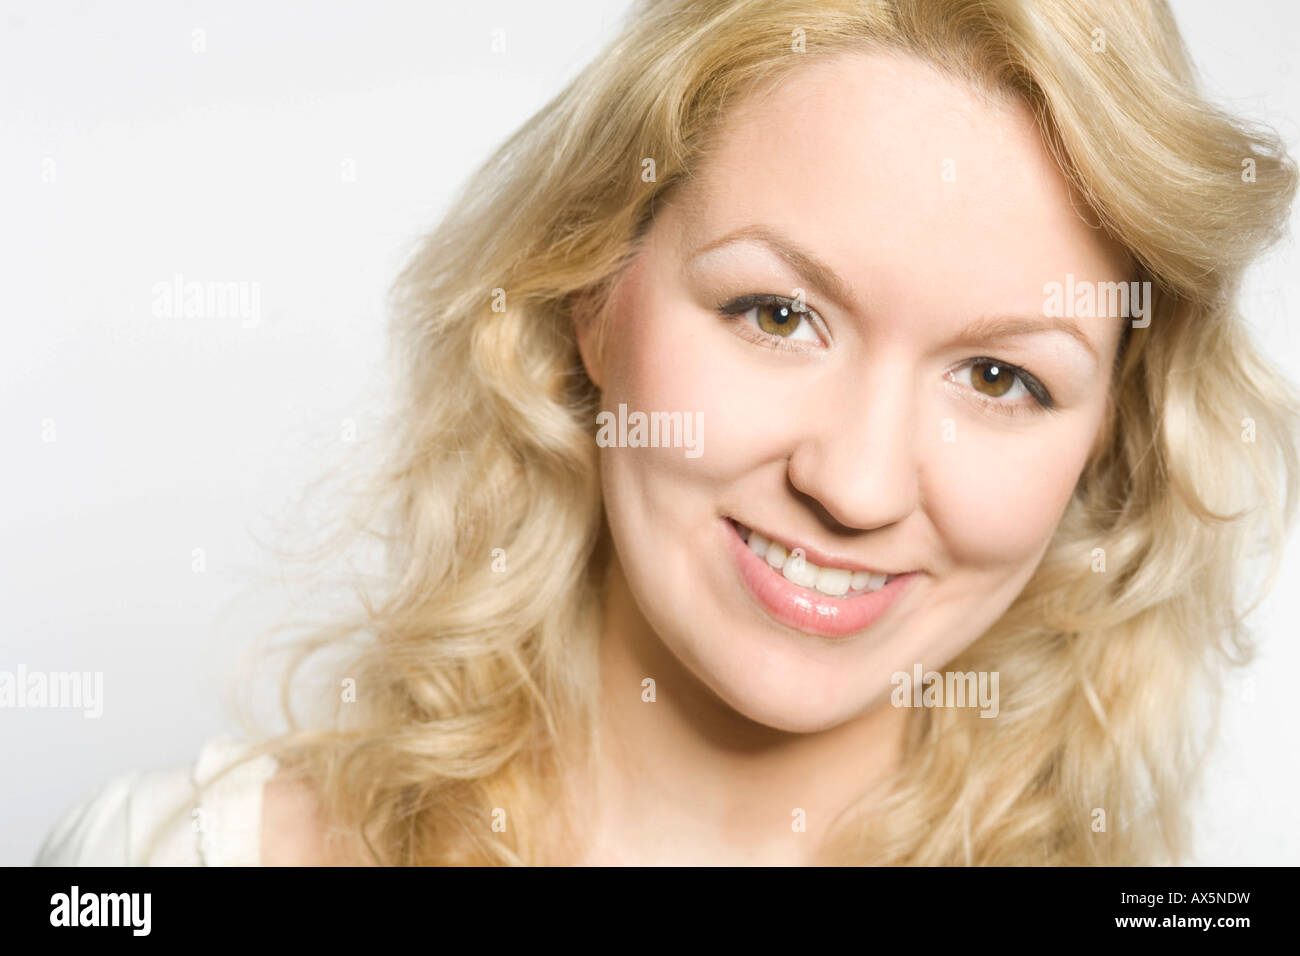 Portrait of a laughing young blonde woman looking straight ahed Stock Photo